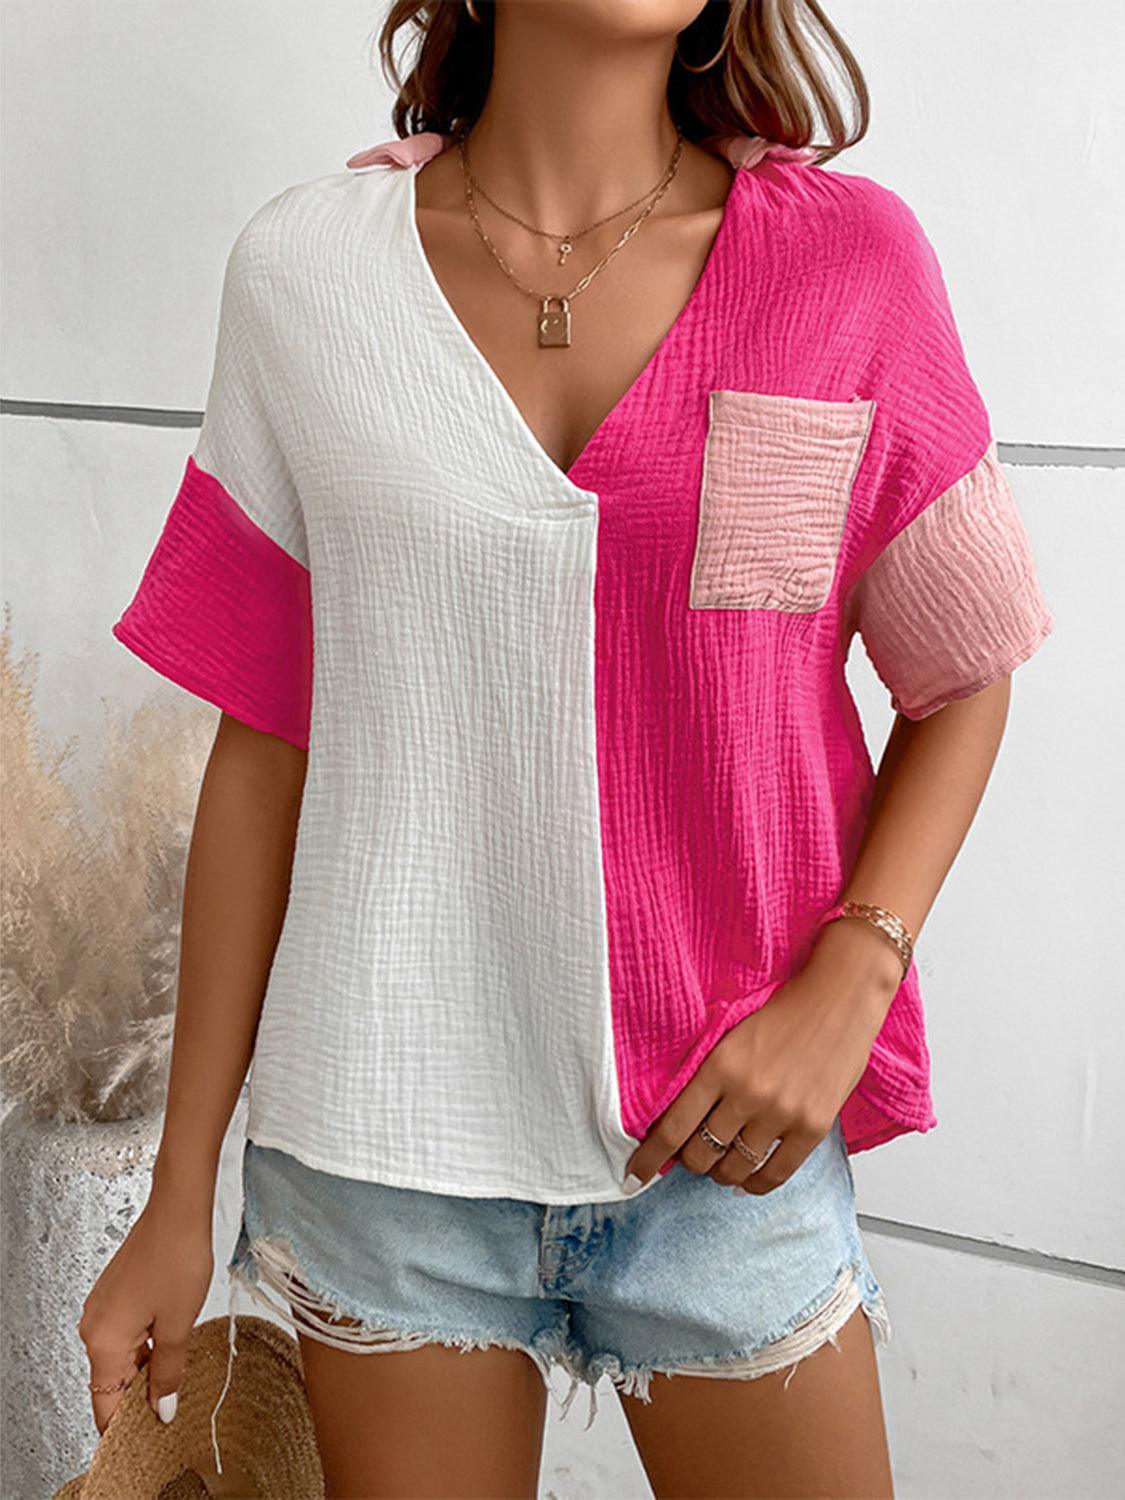 a woman wearing a pink and white top